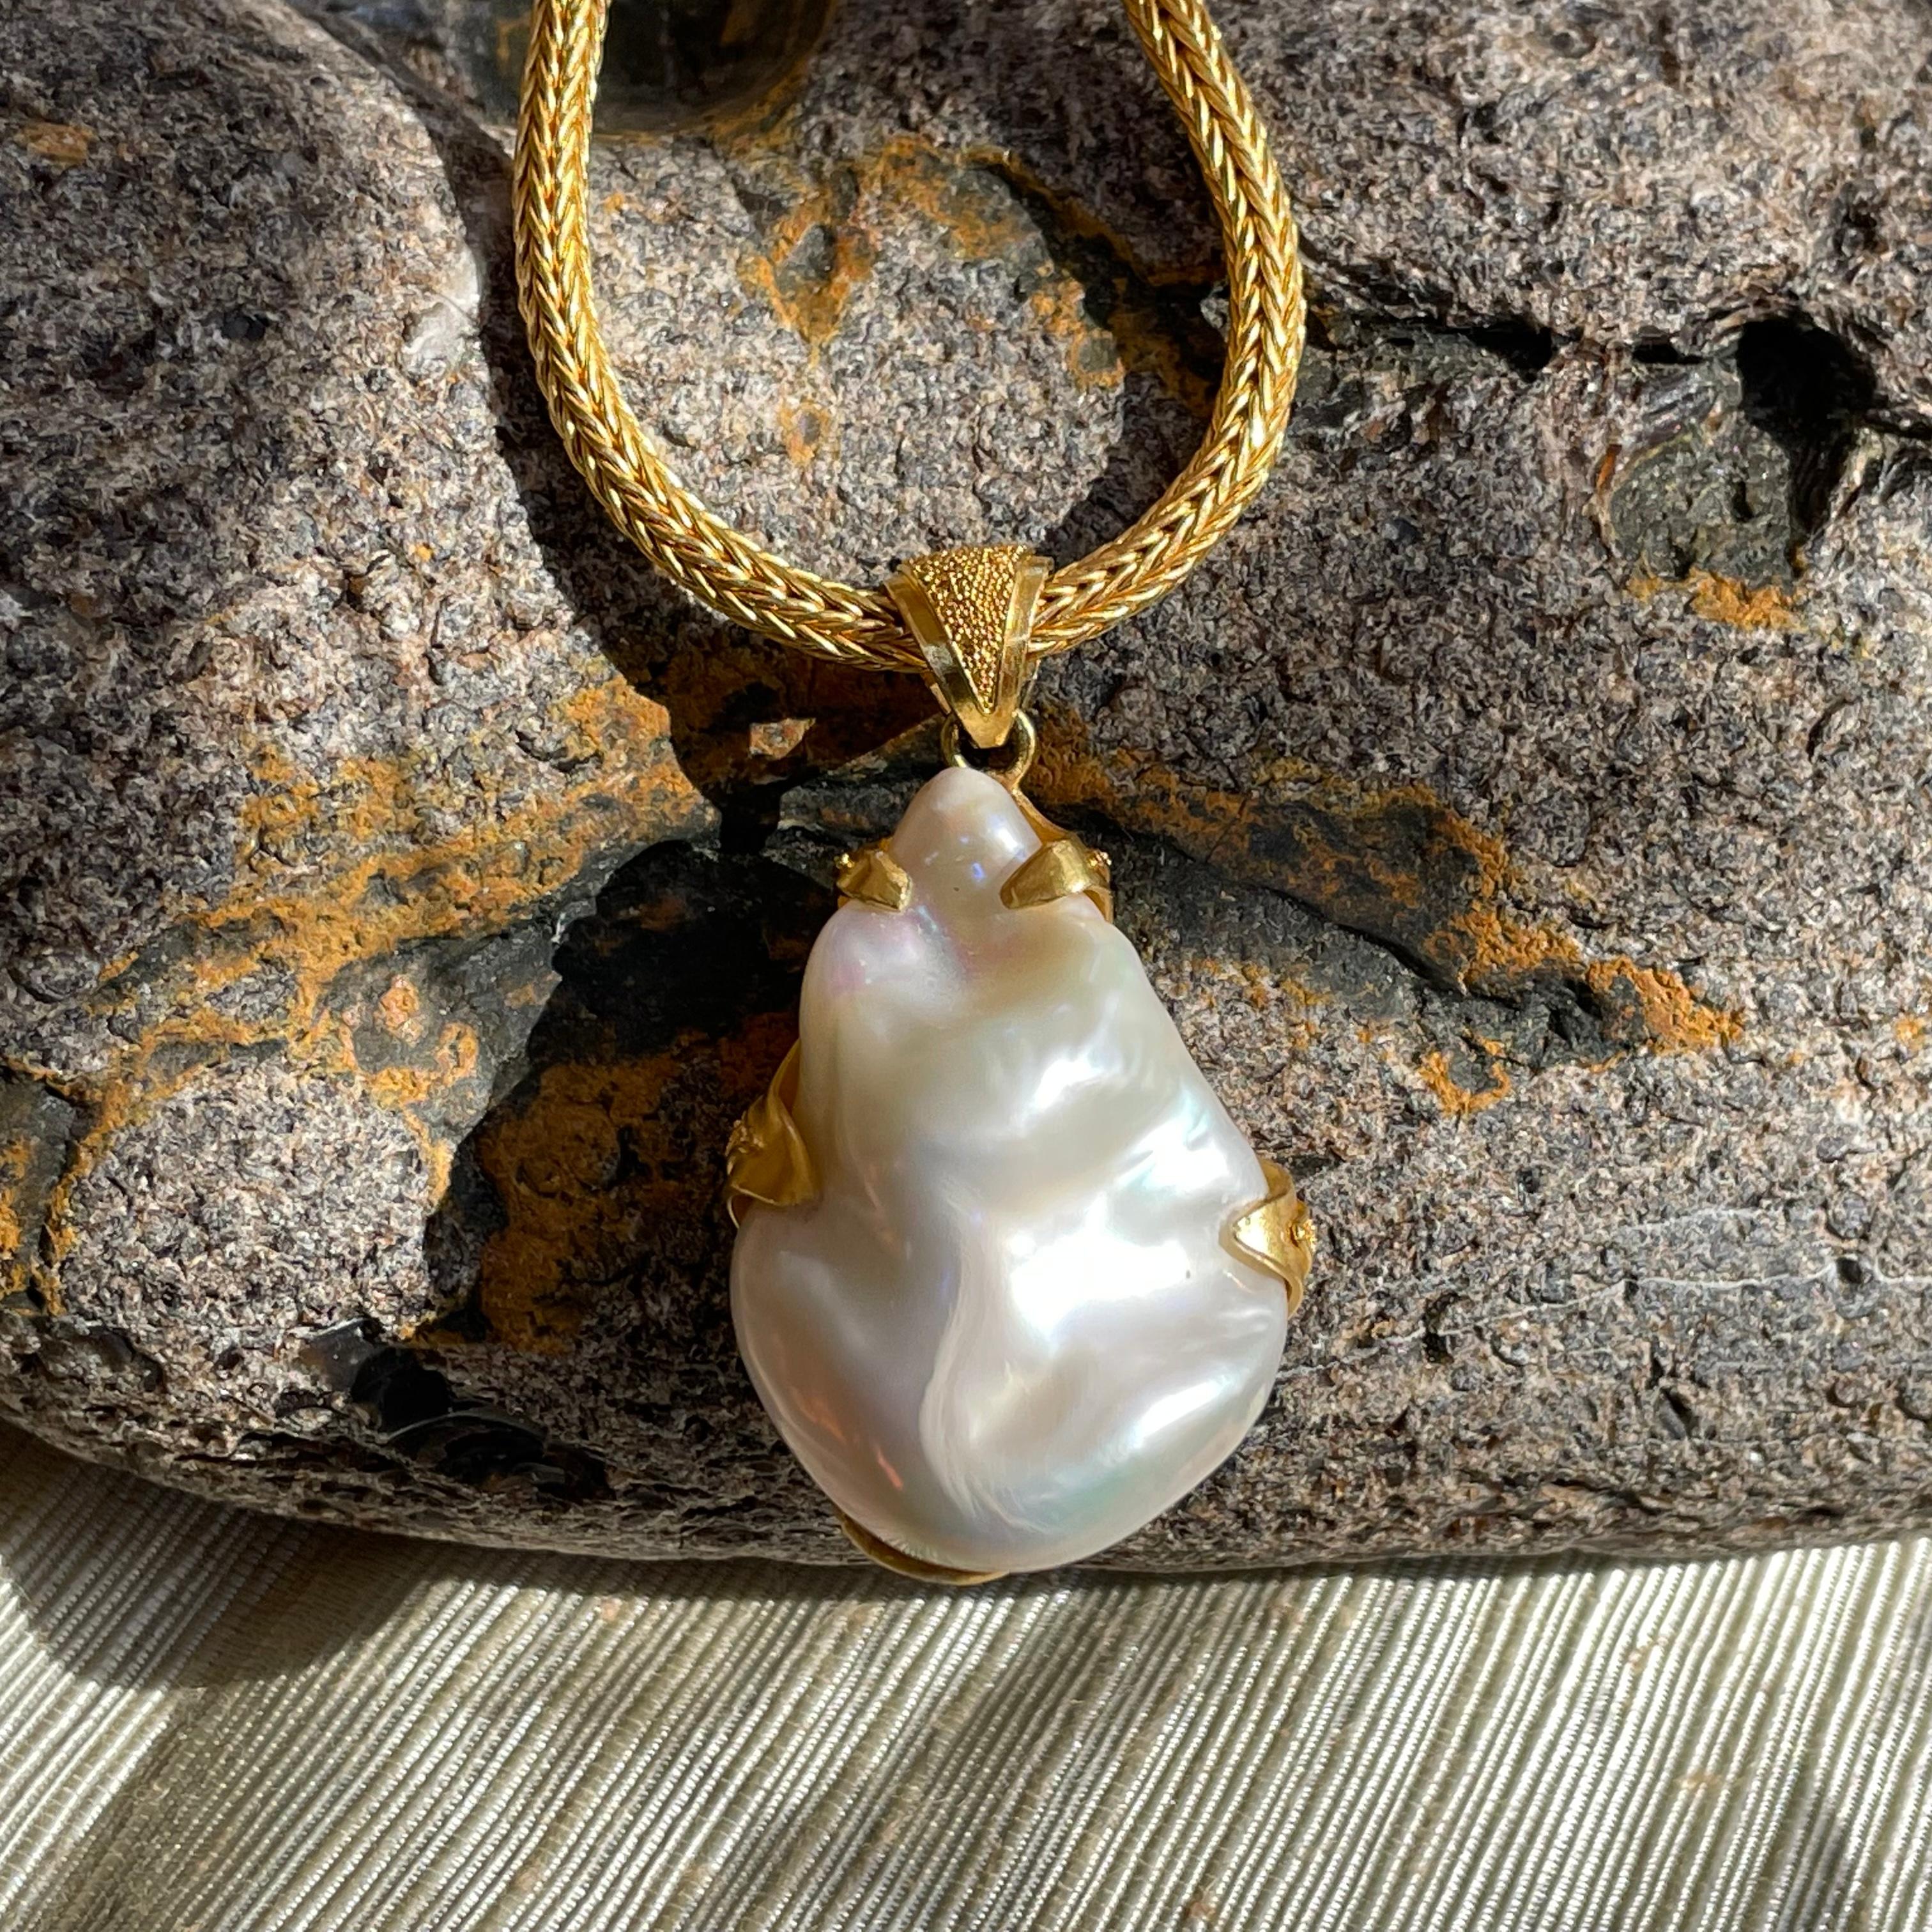 A high luster, large, 22 x 32 mm irregular freshwater pearl is held in 22 karat gold embrace with granulated accents in this distinctive Steven Battelle pendant.  The woven chain shown is not included but can be ordered additionally.